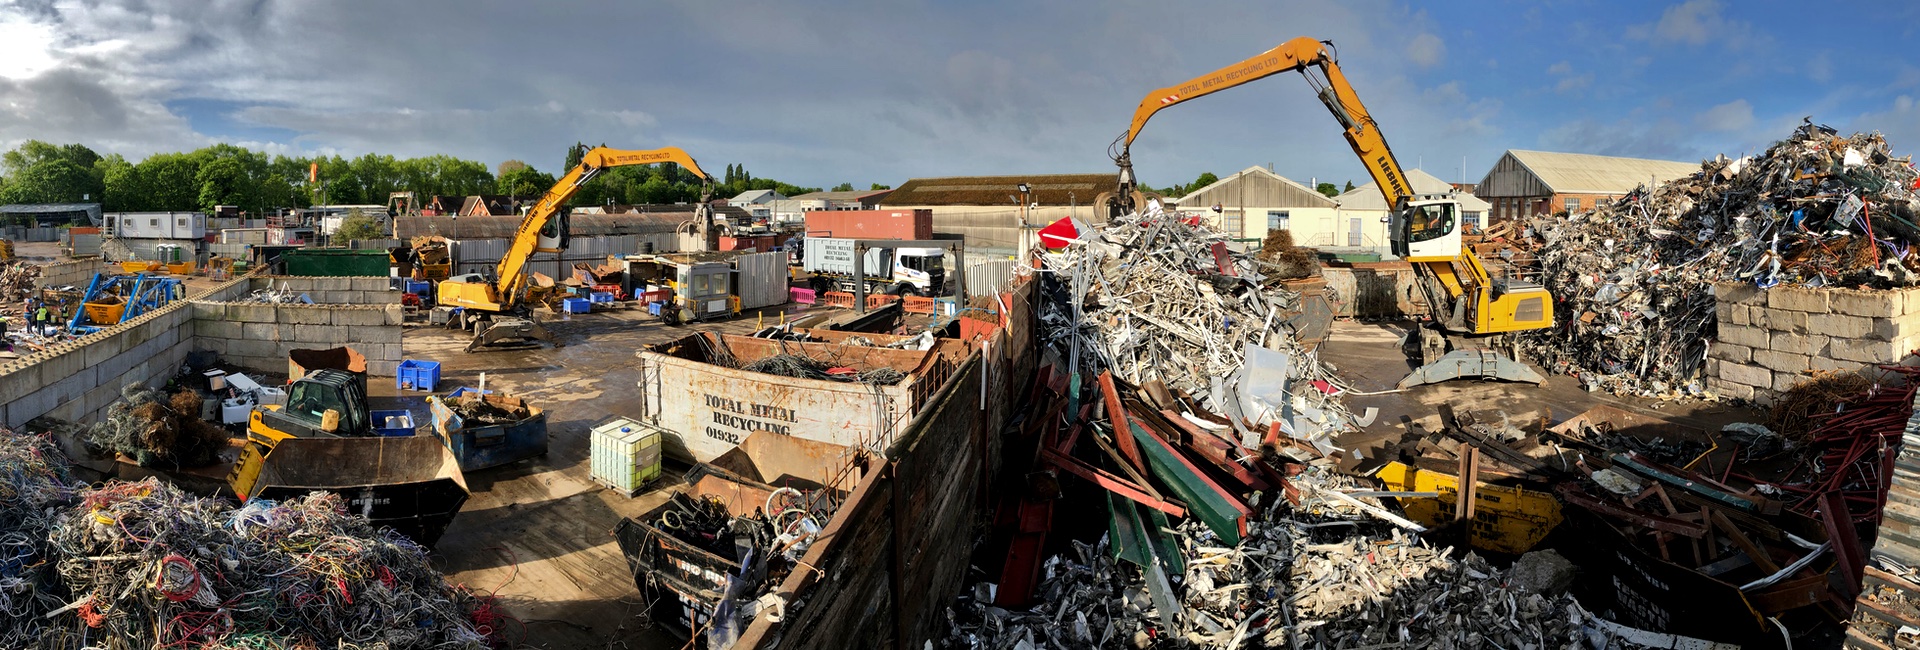 Metal Recycling Facility with machinery processing ferrous and non ferrous metals